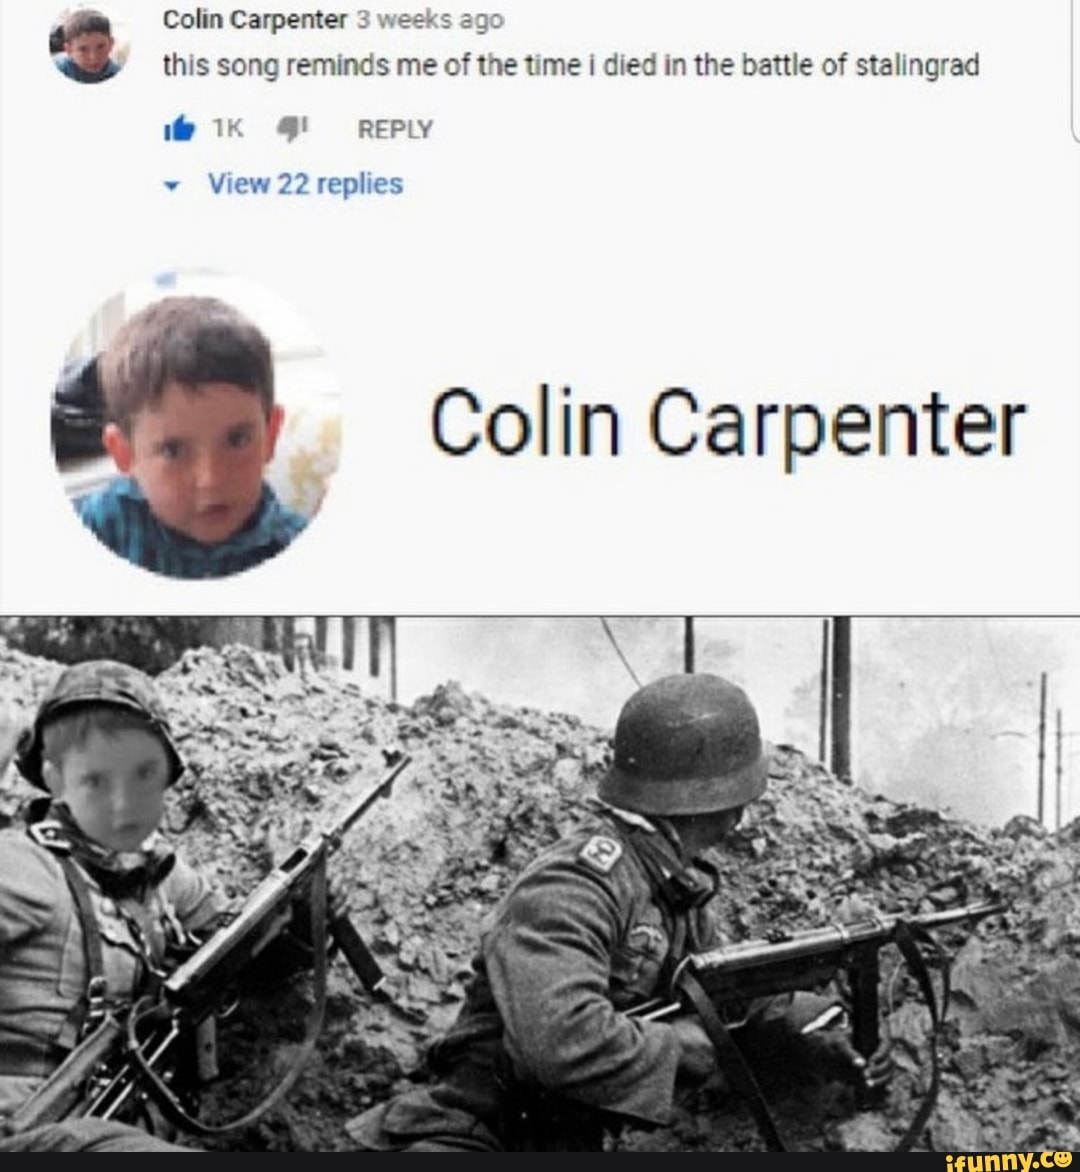 Colin Carpenter 3 Weeks This Song Reminds Me Of The Time I Died In The Battle Of Stalingrad Colin Carpenter Ifunny - open beta stalingrad 1942 1943 roblox